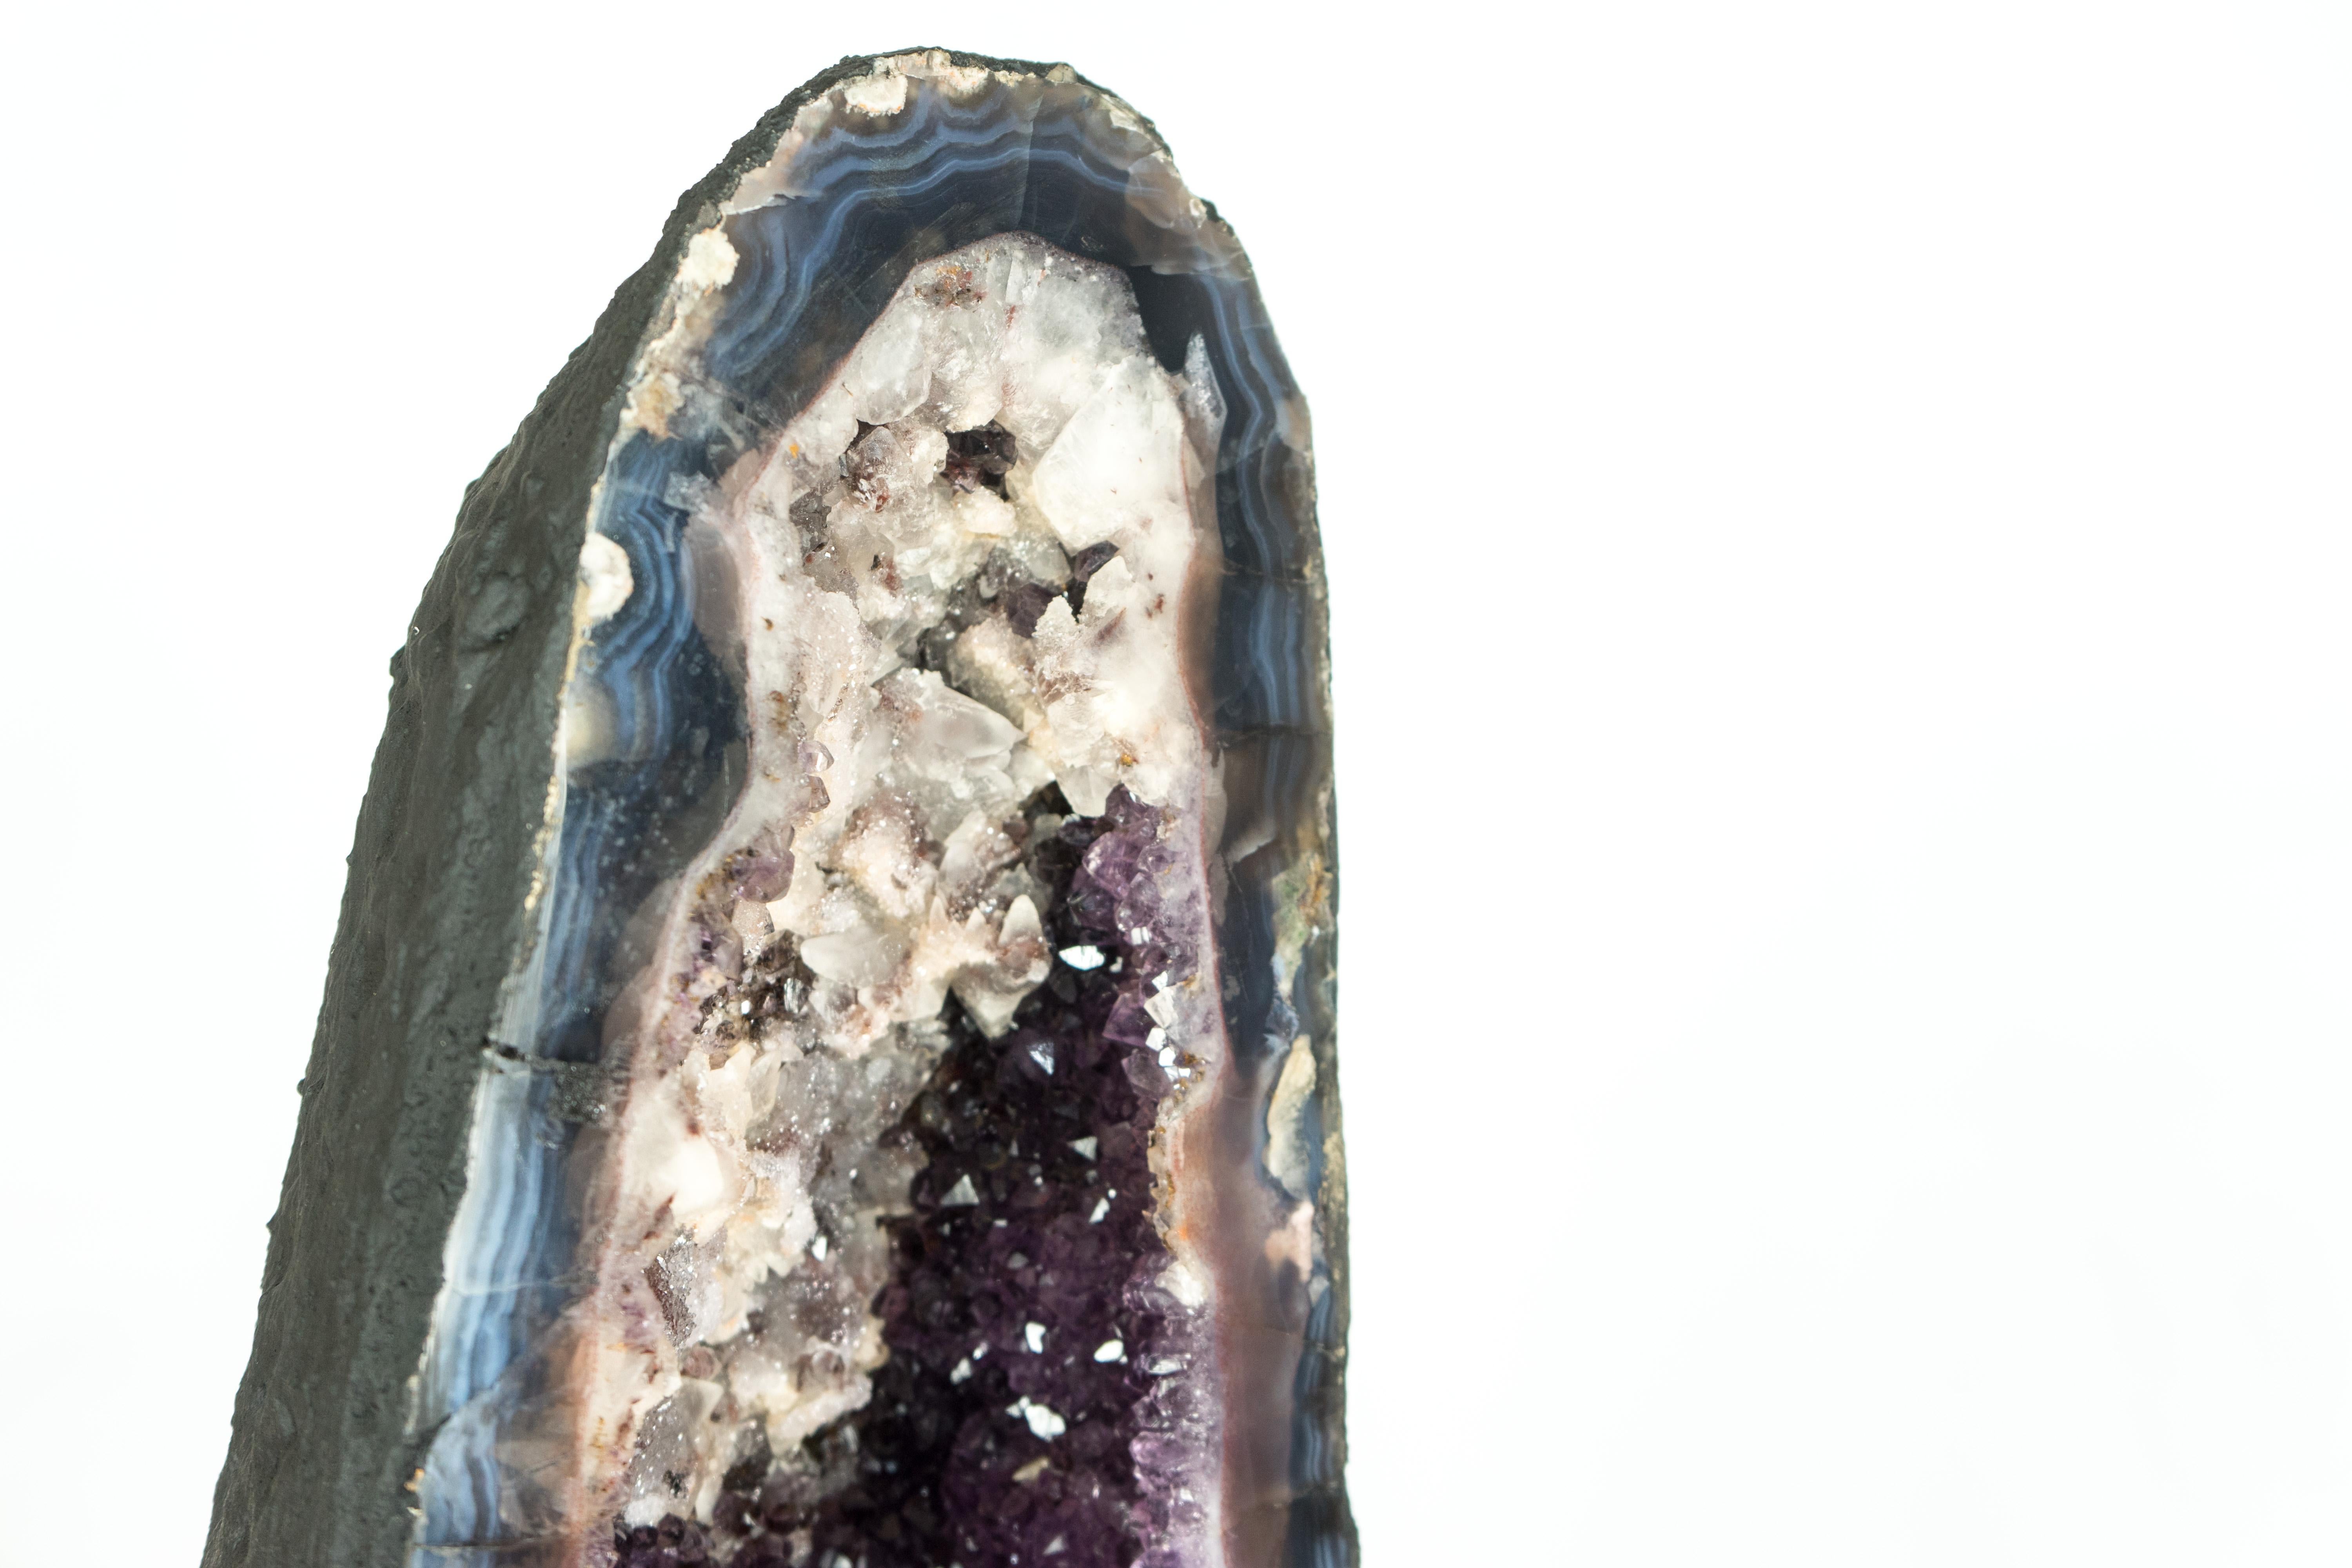 Deep Purple Amethyst Cathedral Geode, with Lace Agate and Calcite, Large & Tall For Sale 2